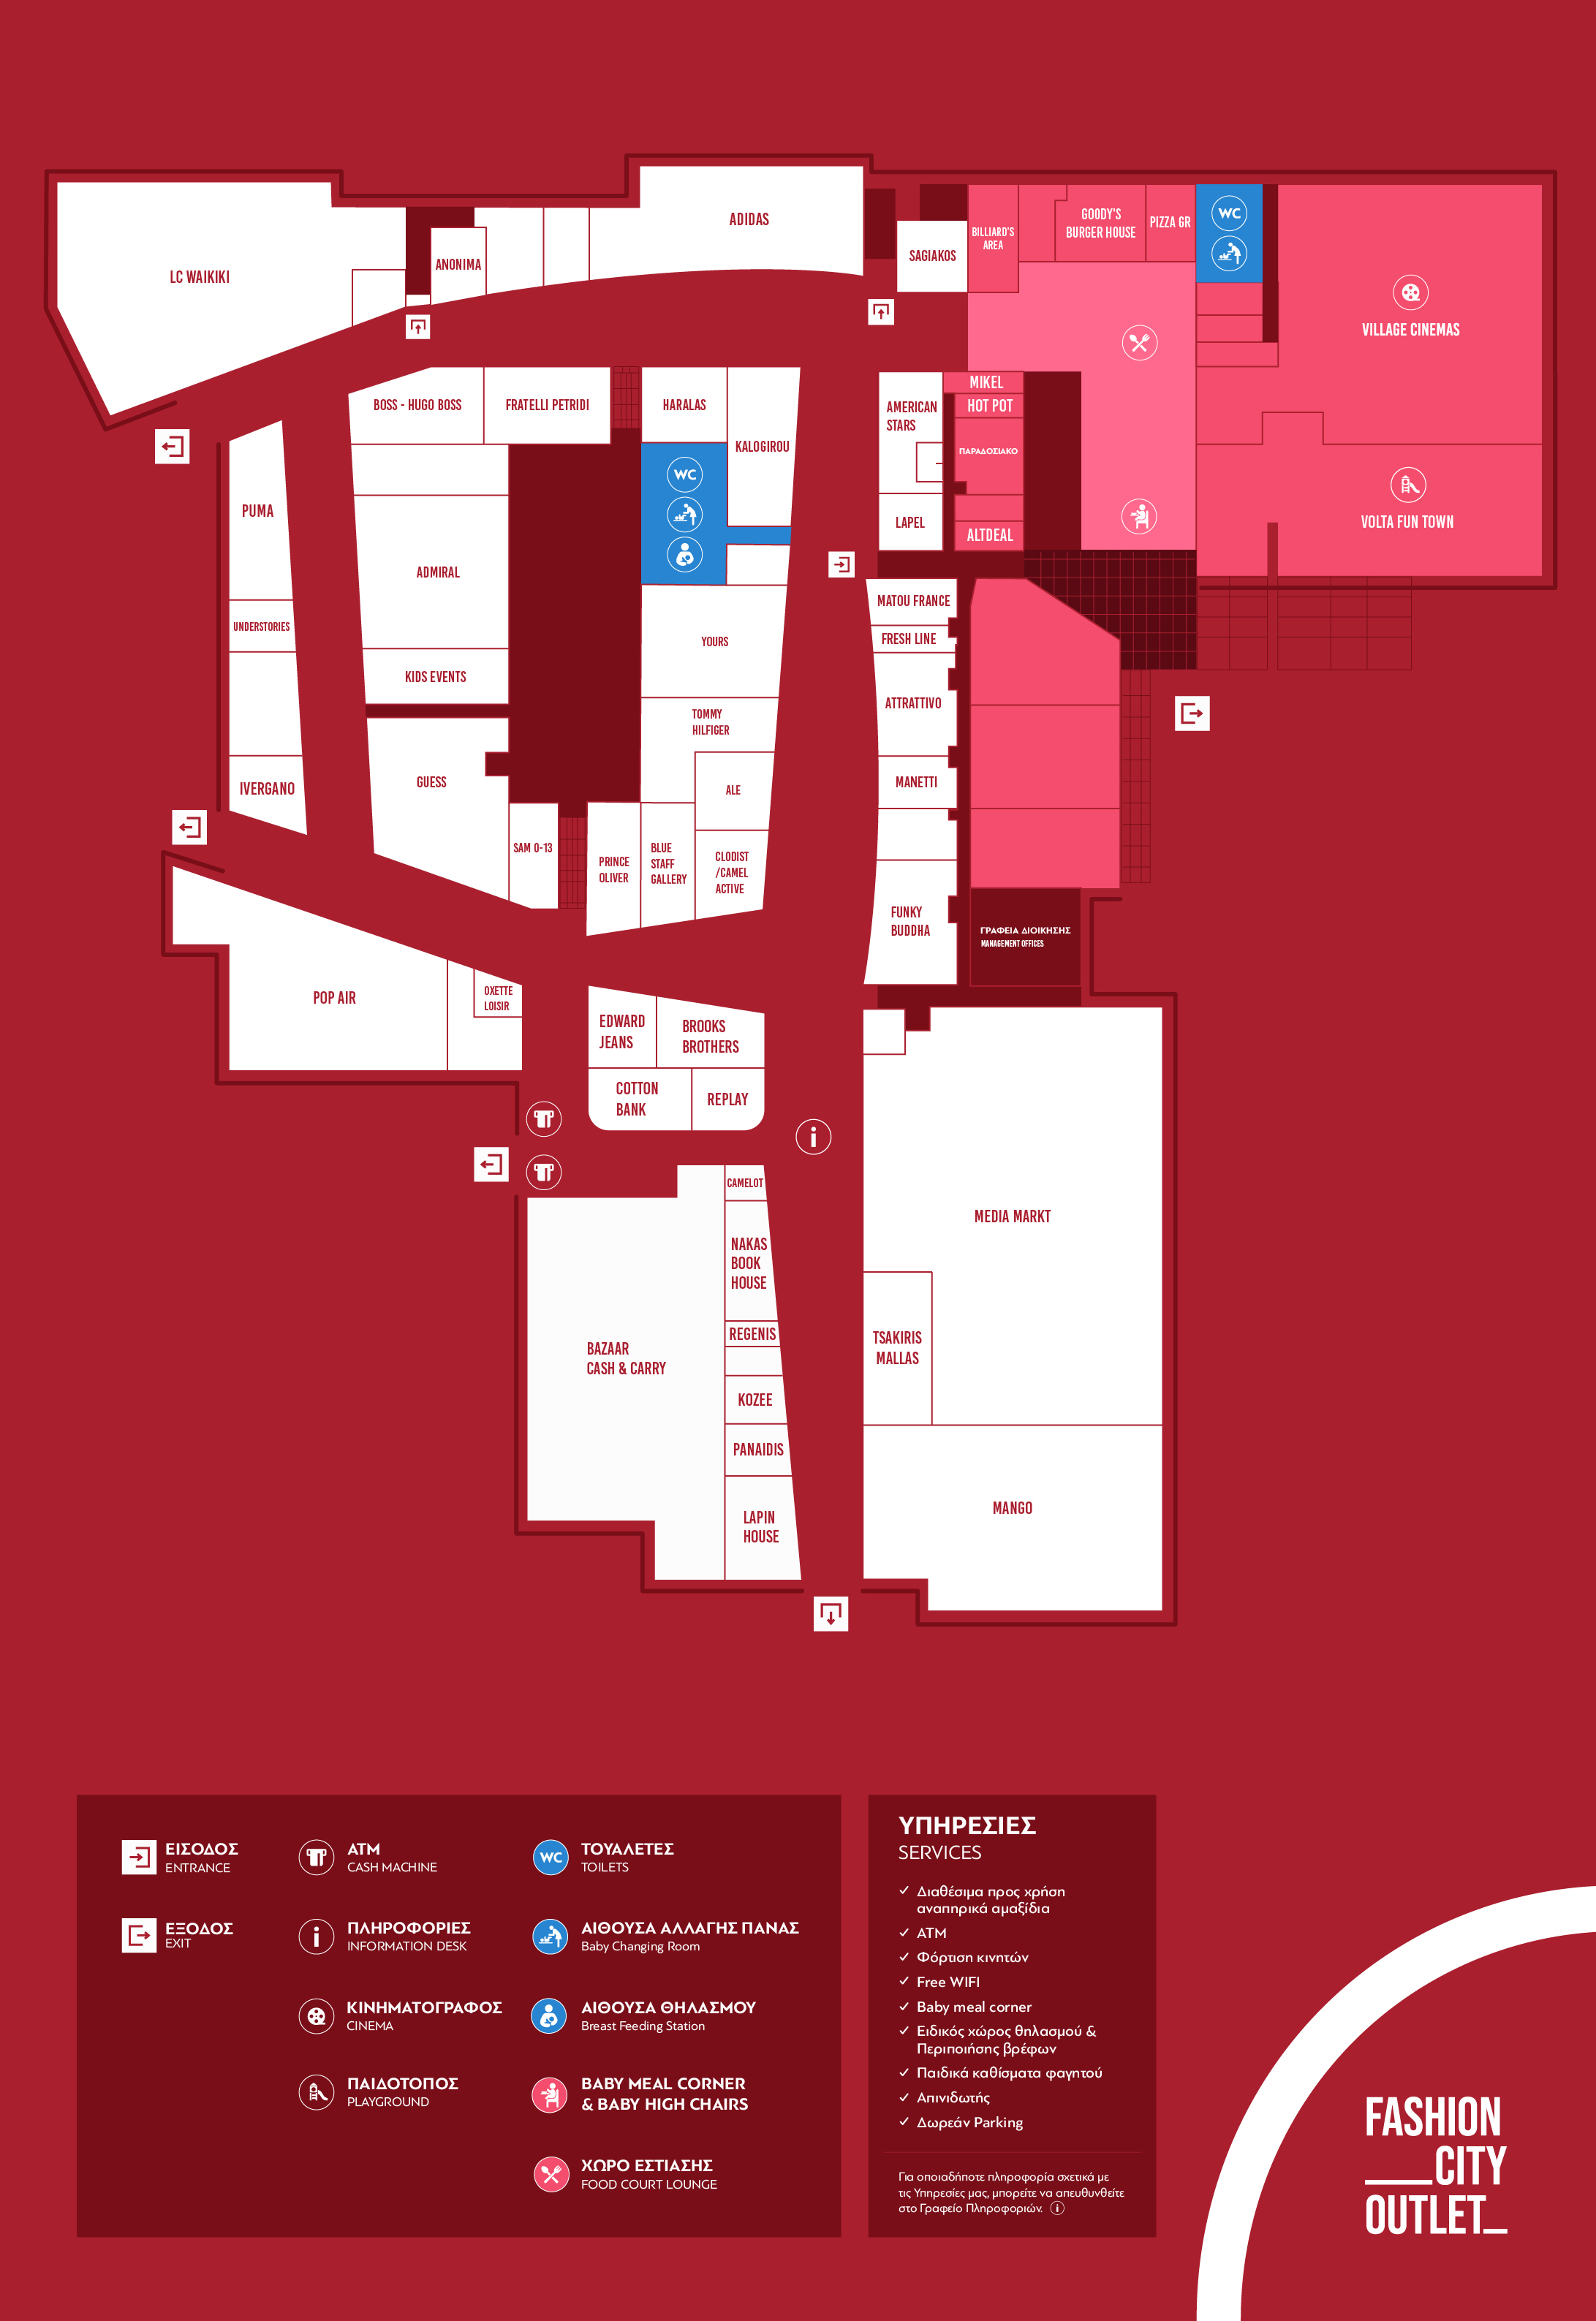 FLOOR PLAN - Fashion City Outlet